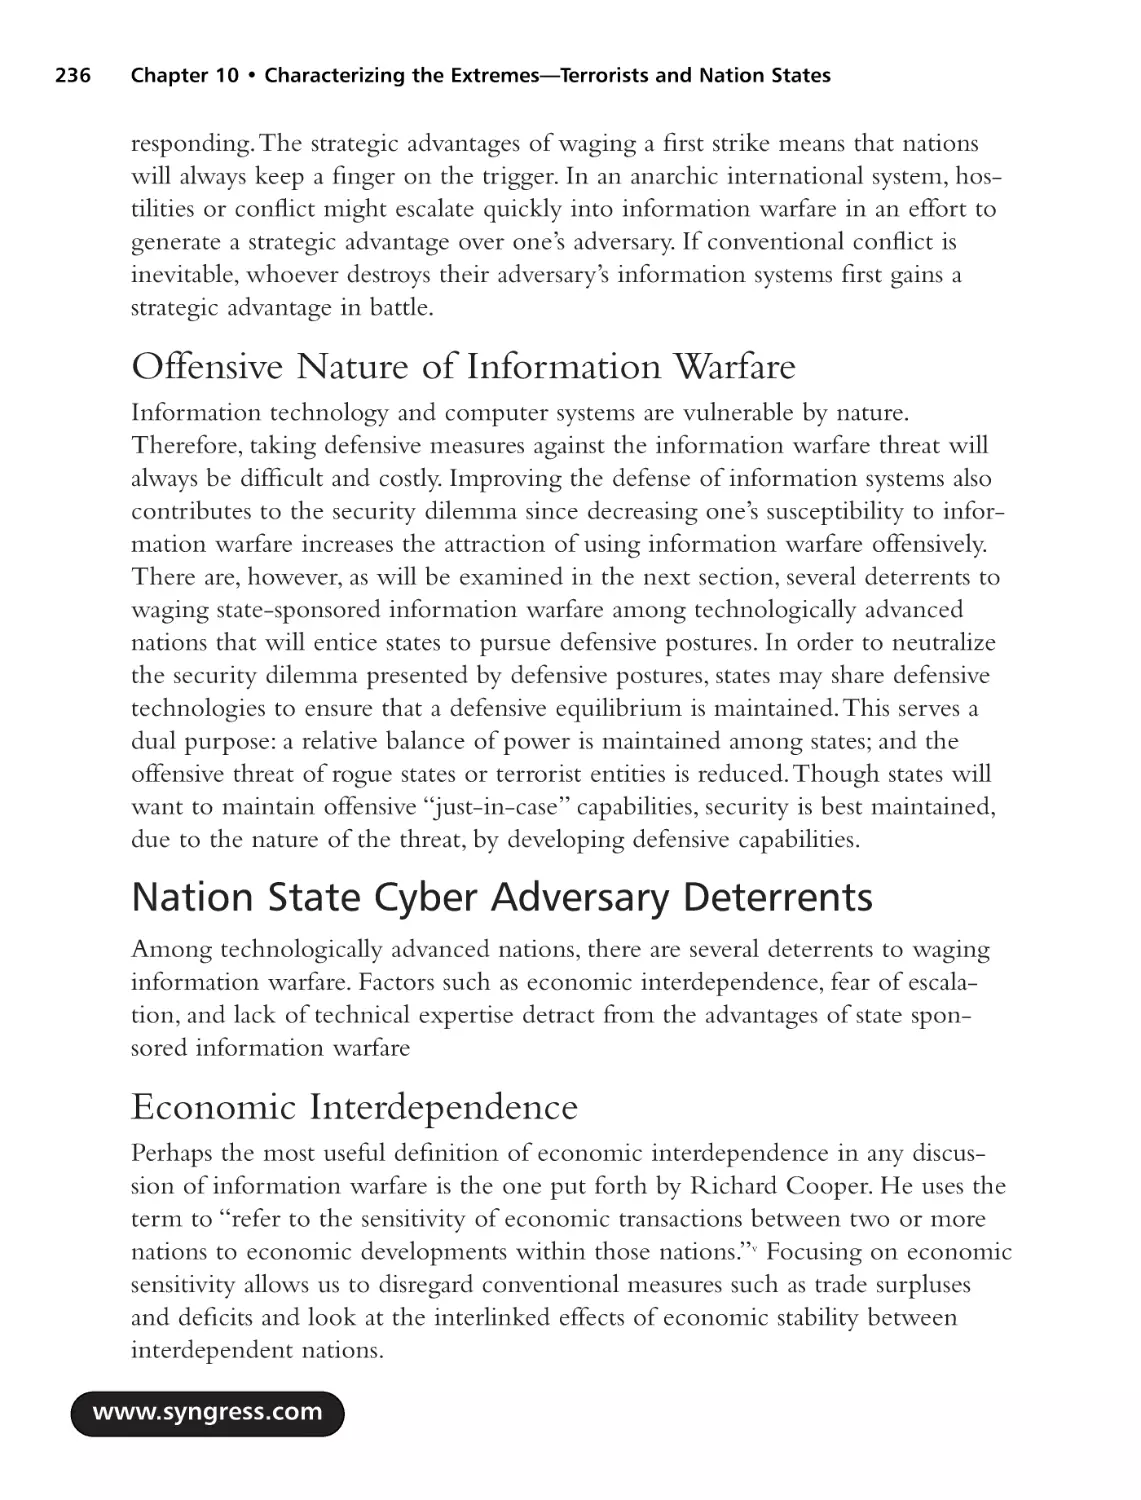 Offensive Nature of Information Warfare
Nation State Cyber Adversary Deterrents
Economic Interdependence